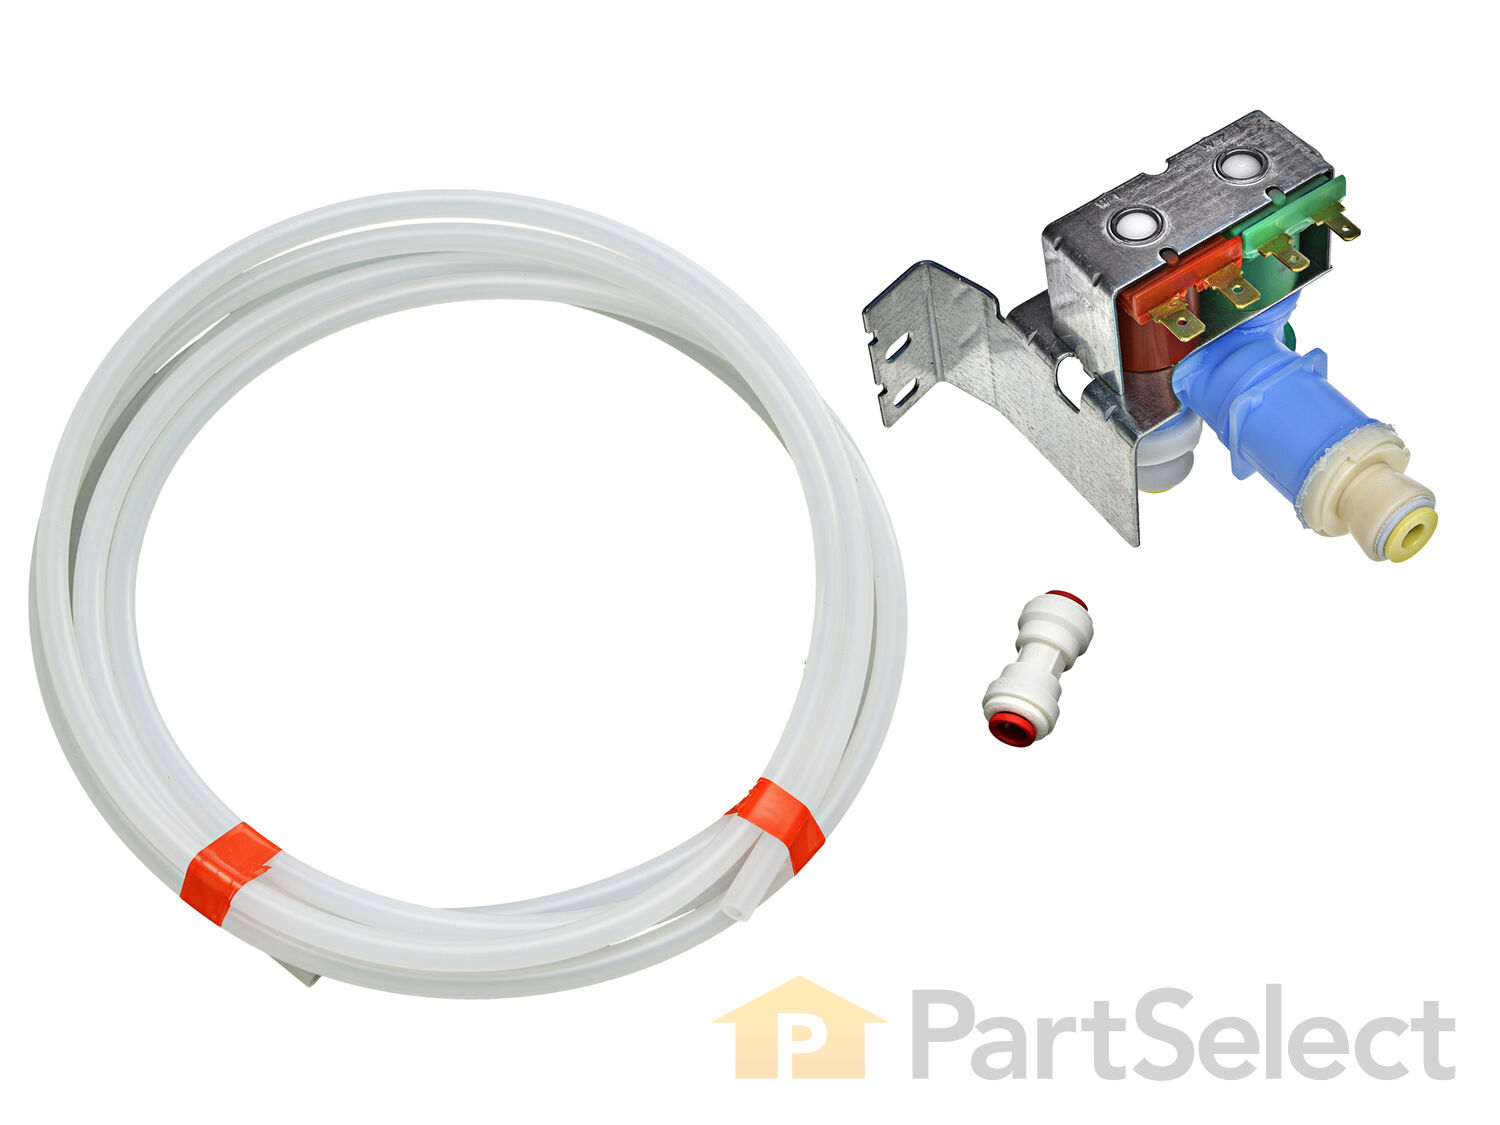 Whirlpool W10408179 Refrigerator Water Valve With Hose and Fitting Robertshaw 